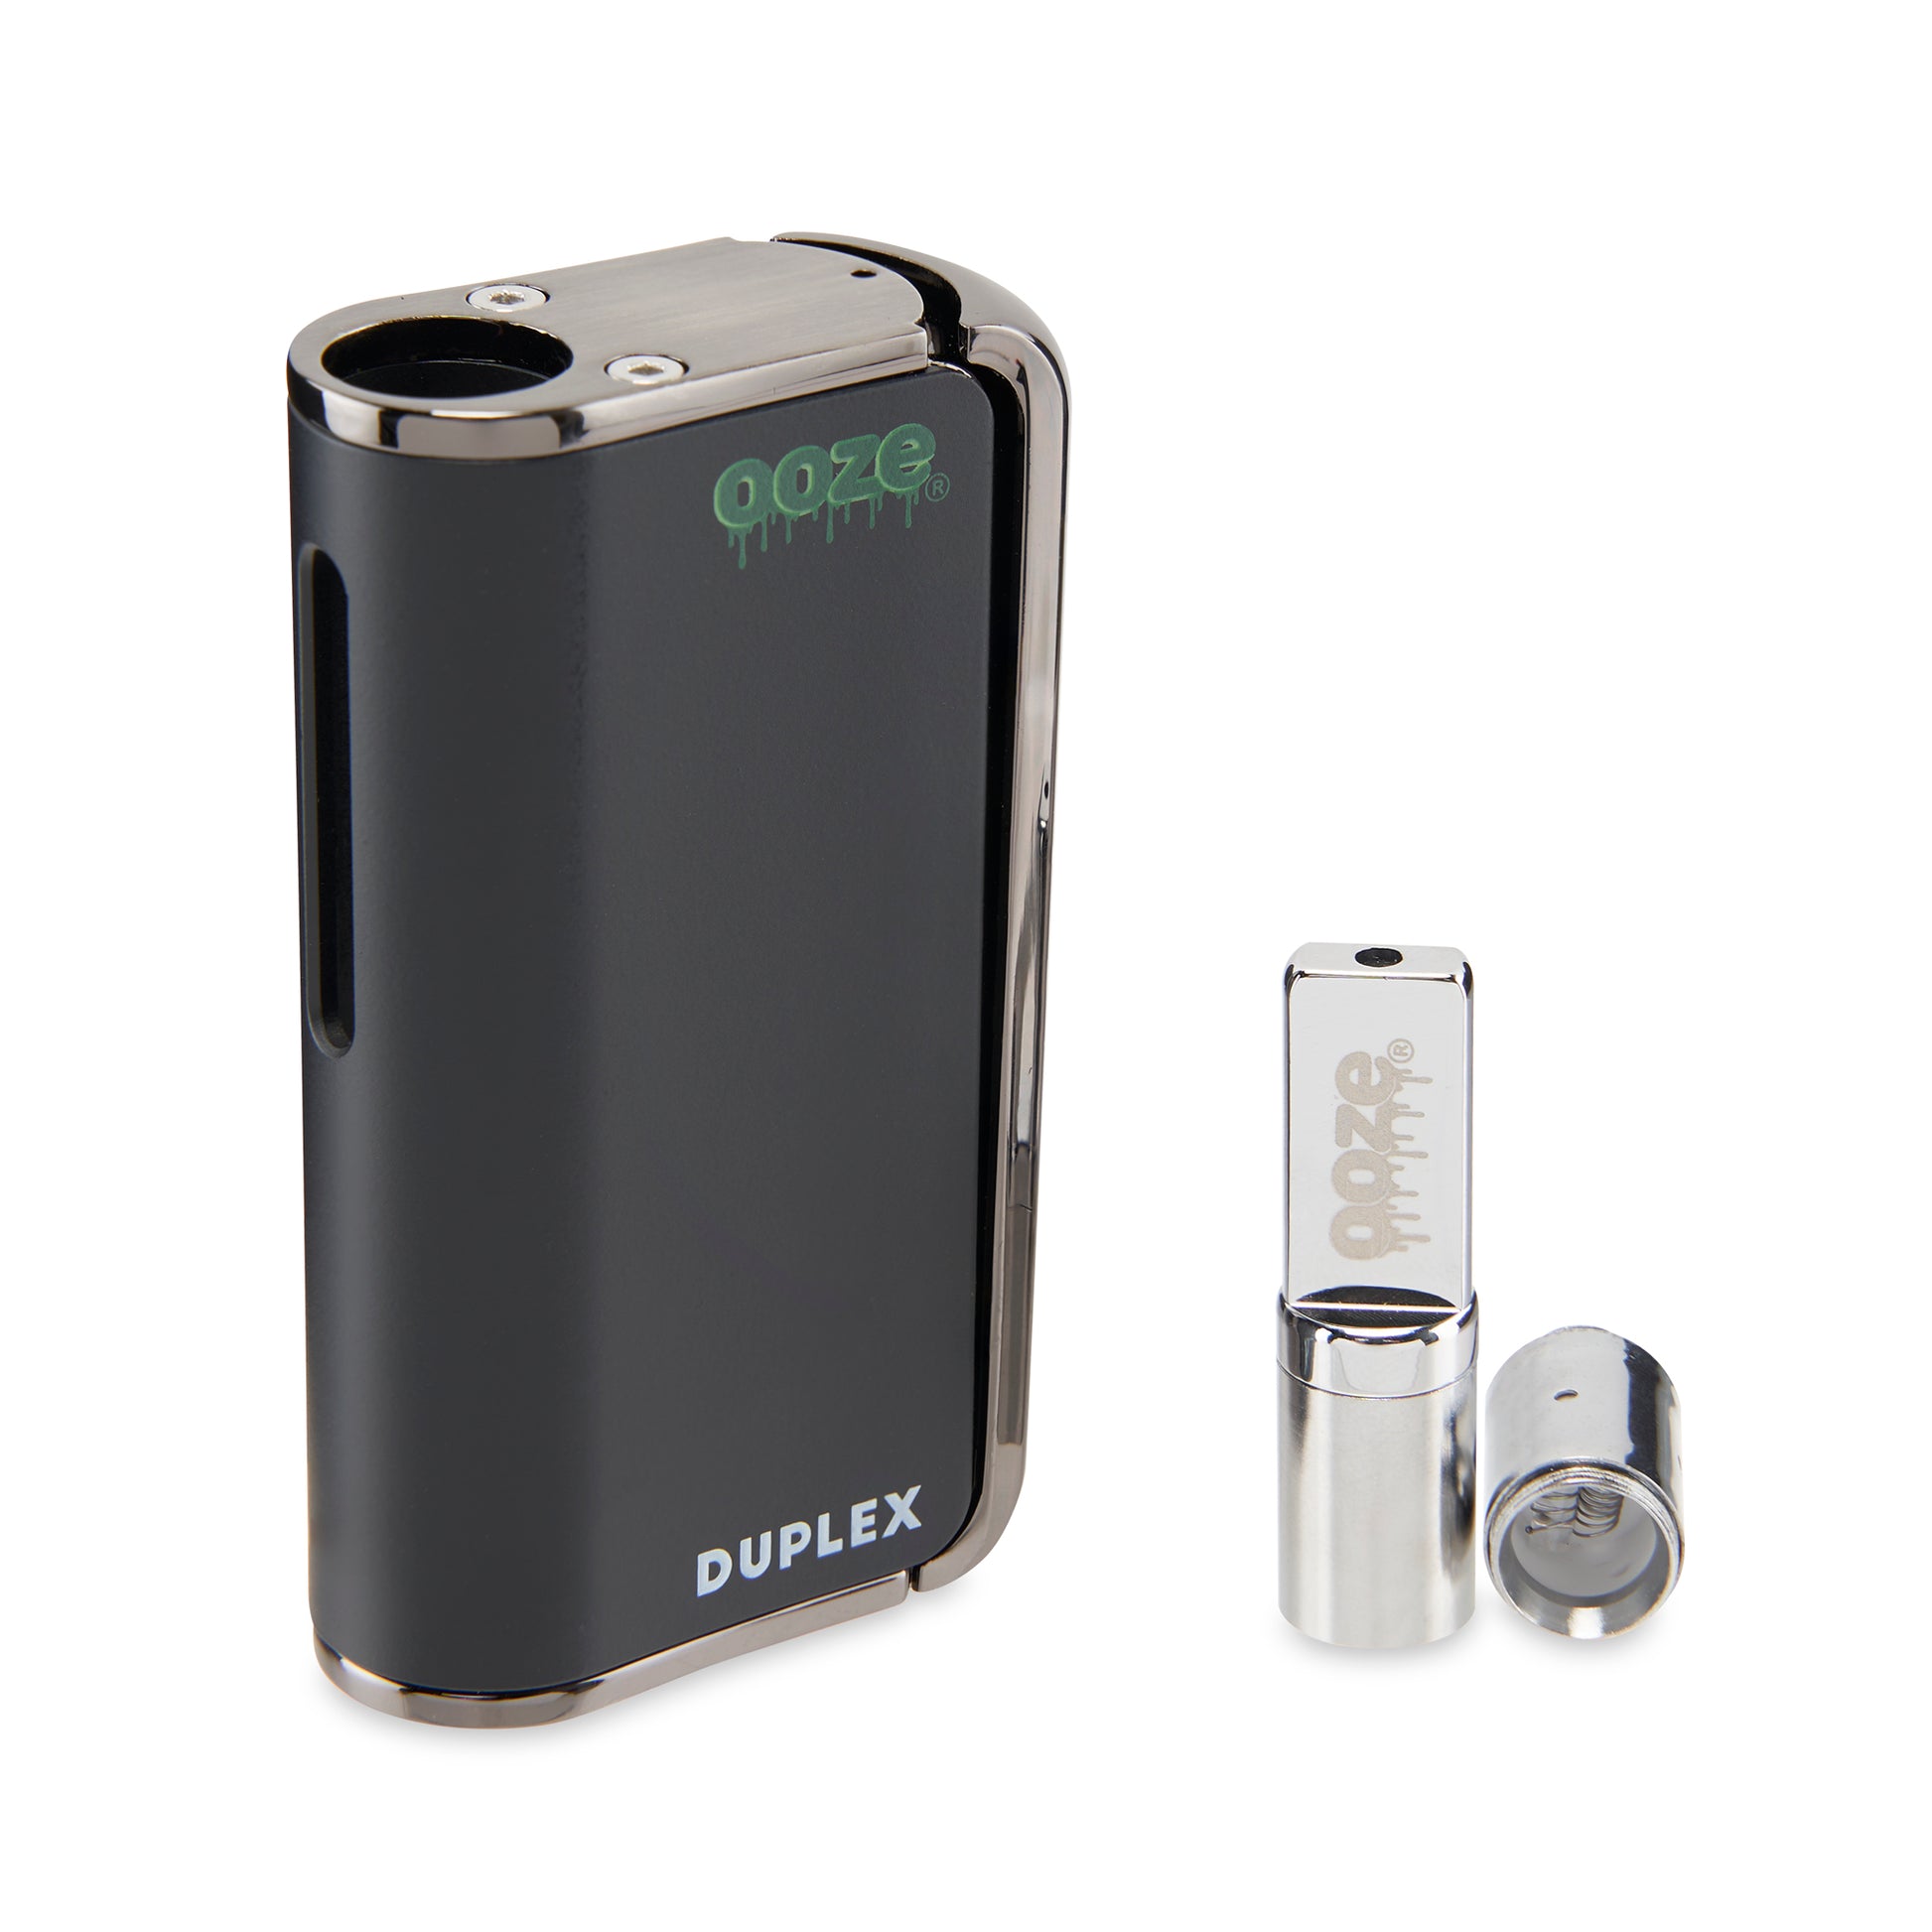 The Panther Black Ooze Duplex Pro Vaporizer is shown on an angle with the wax atomizer to the right, disassembled to show the dual quartz coil.